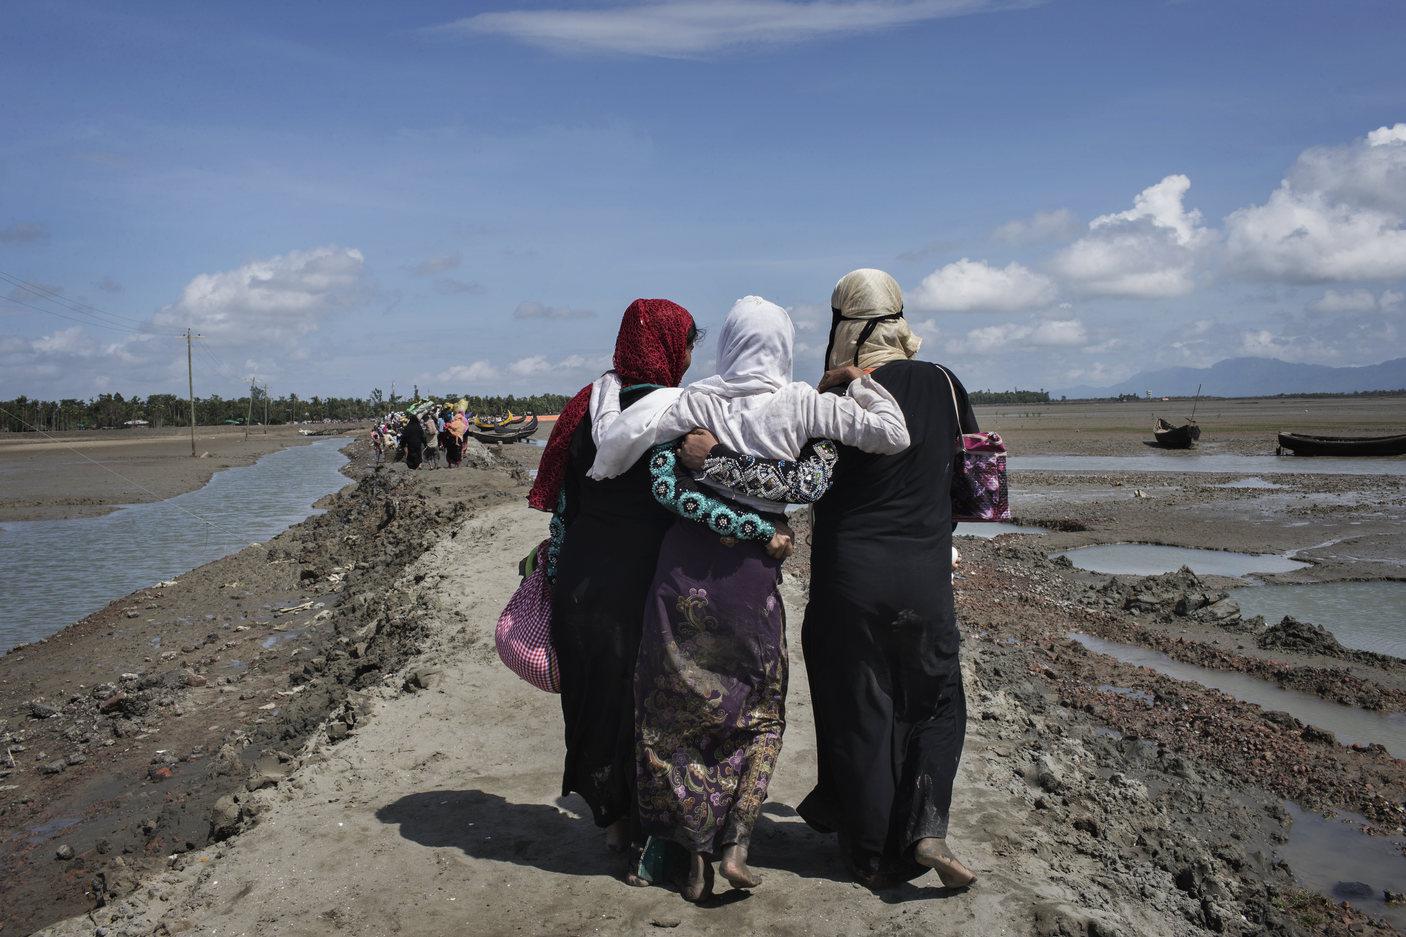 Rohingya women refugees who crossed the Naf River from Burma into Bangladesh continue inland toward refugee camps.